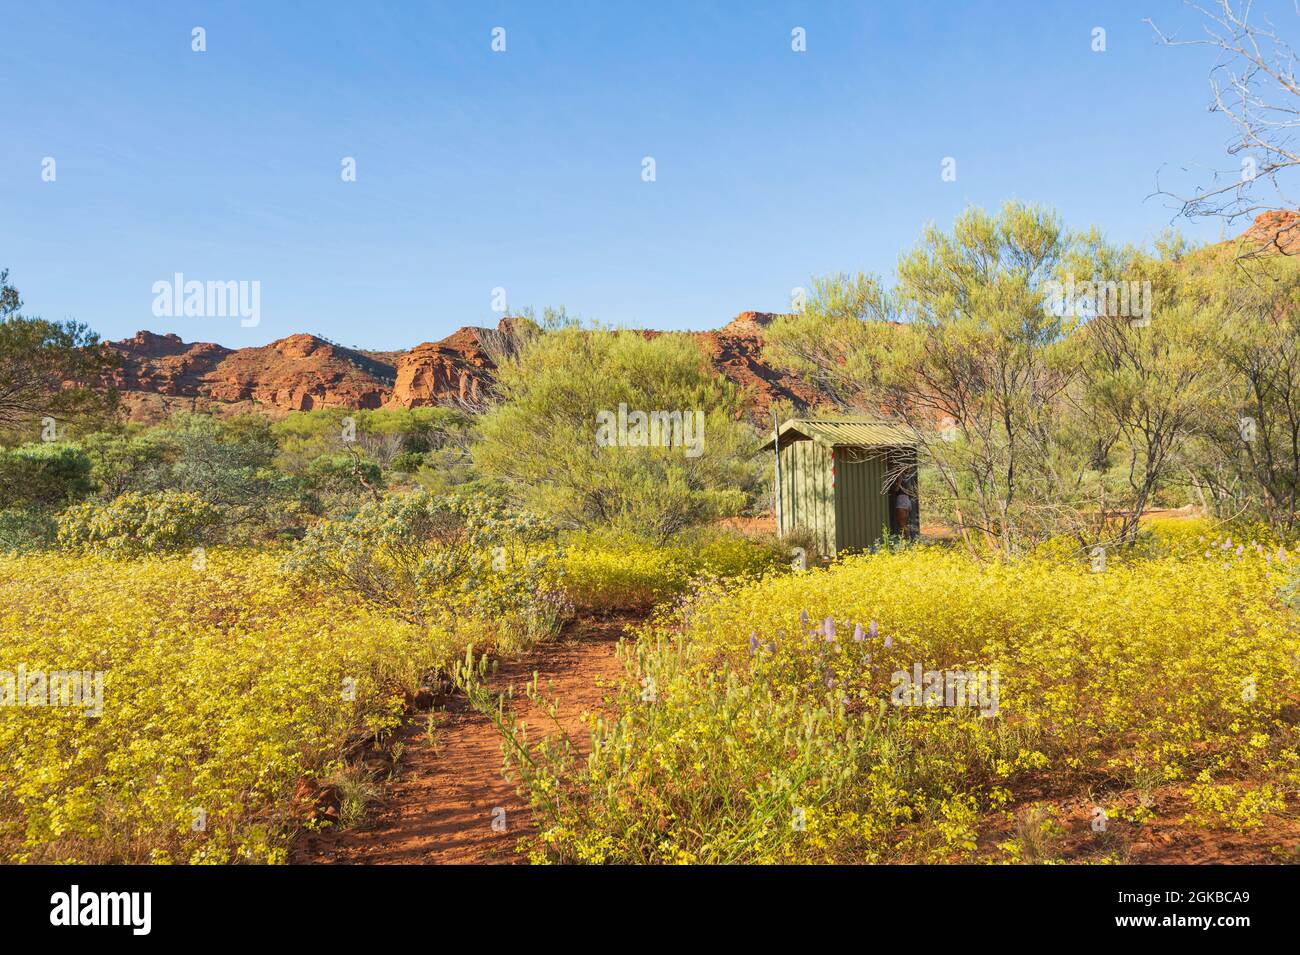 A green hut in a field covered in yellow wildflowers at springtime, Kennedy Range National Park, Western Australia, WA, Australia Stock Photo